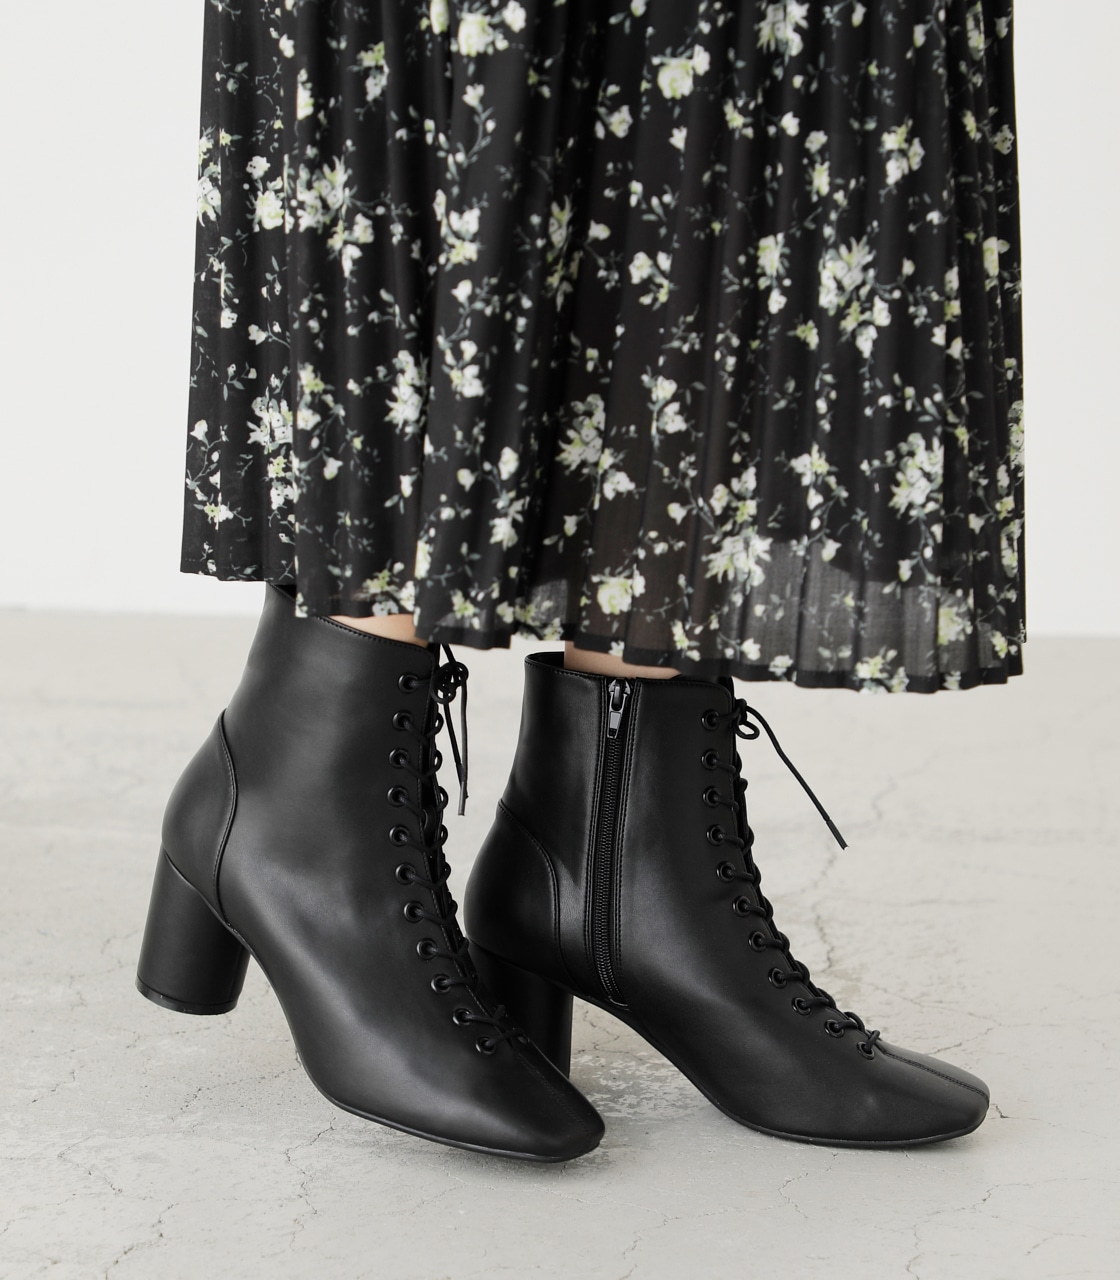 Square Toe Lace Up Boots スクエアトゥレースアップブーツ Azul By Moussy アズールバイマウジー 公式通販サイト